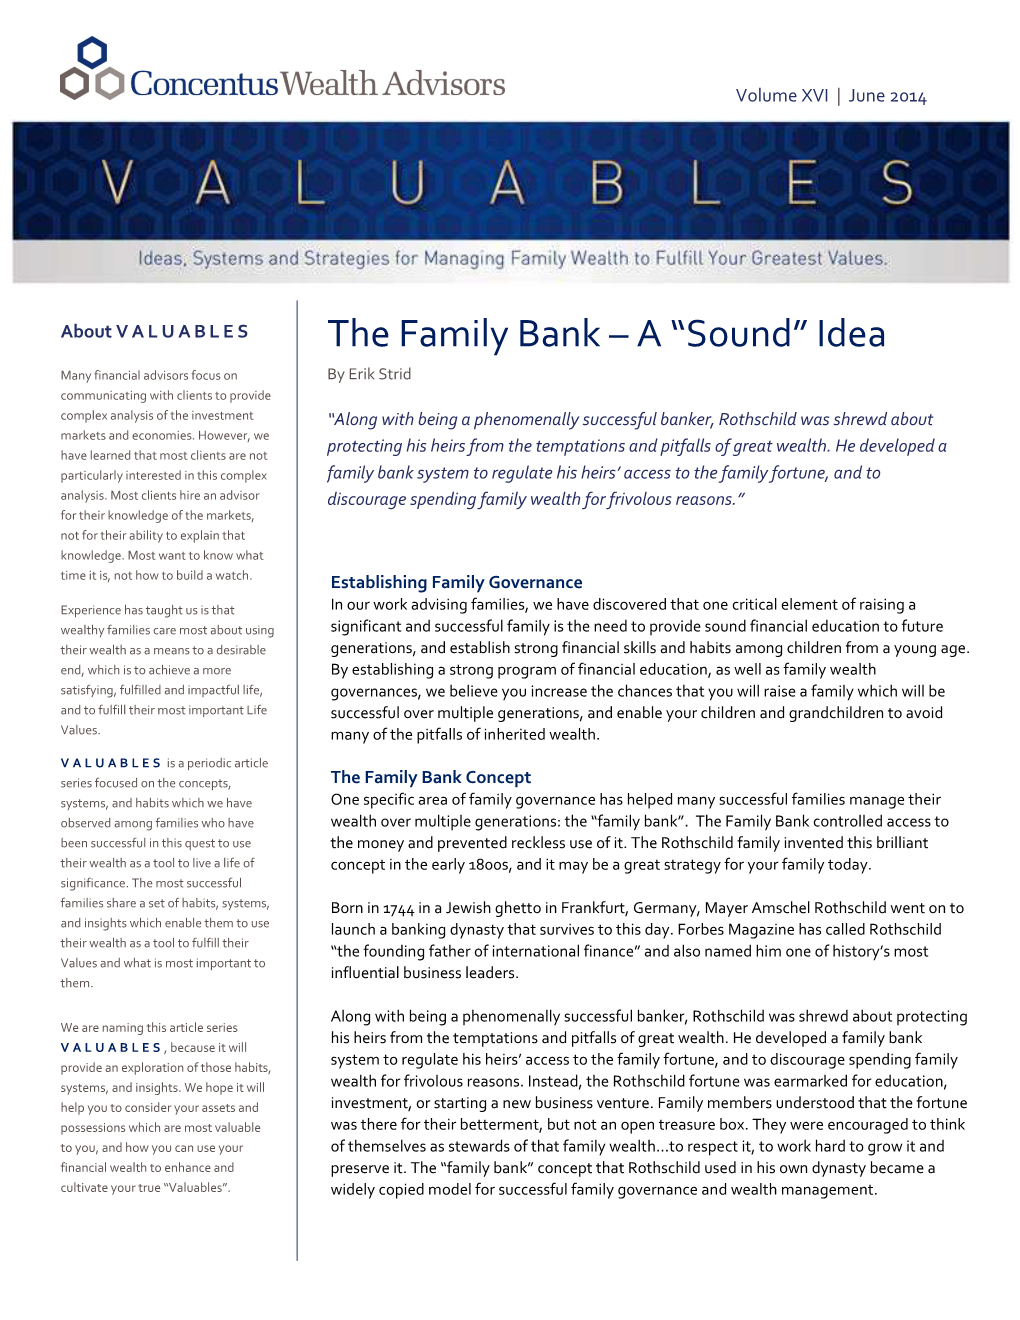 The Family Bank